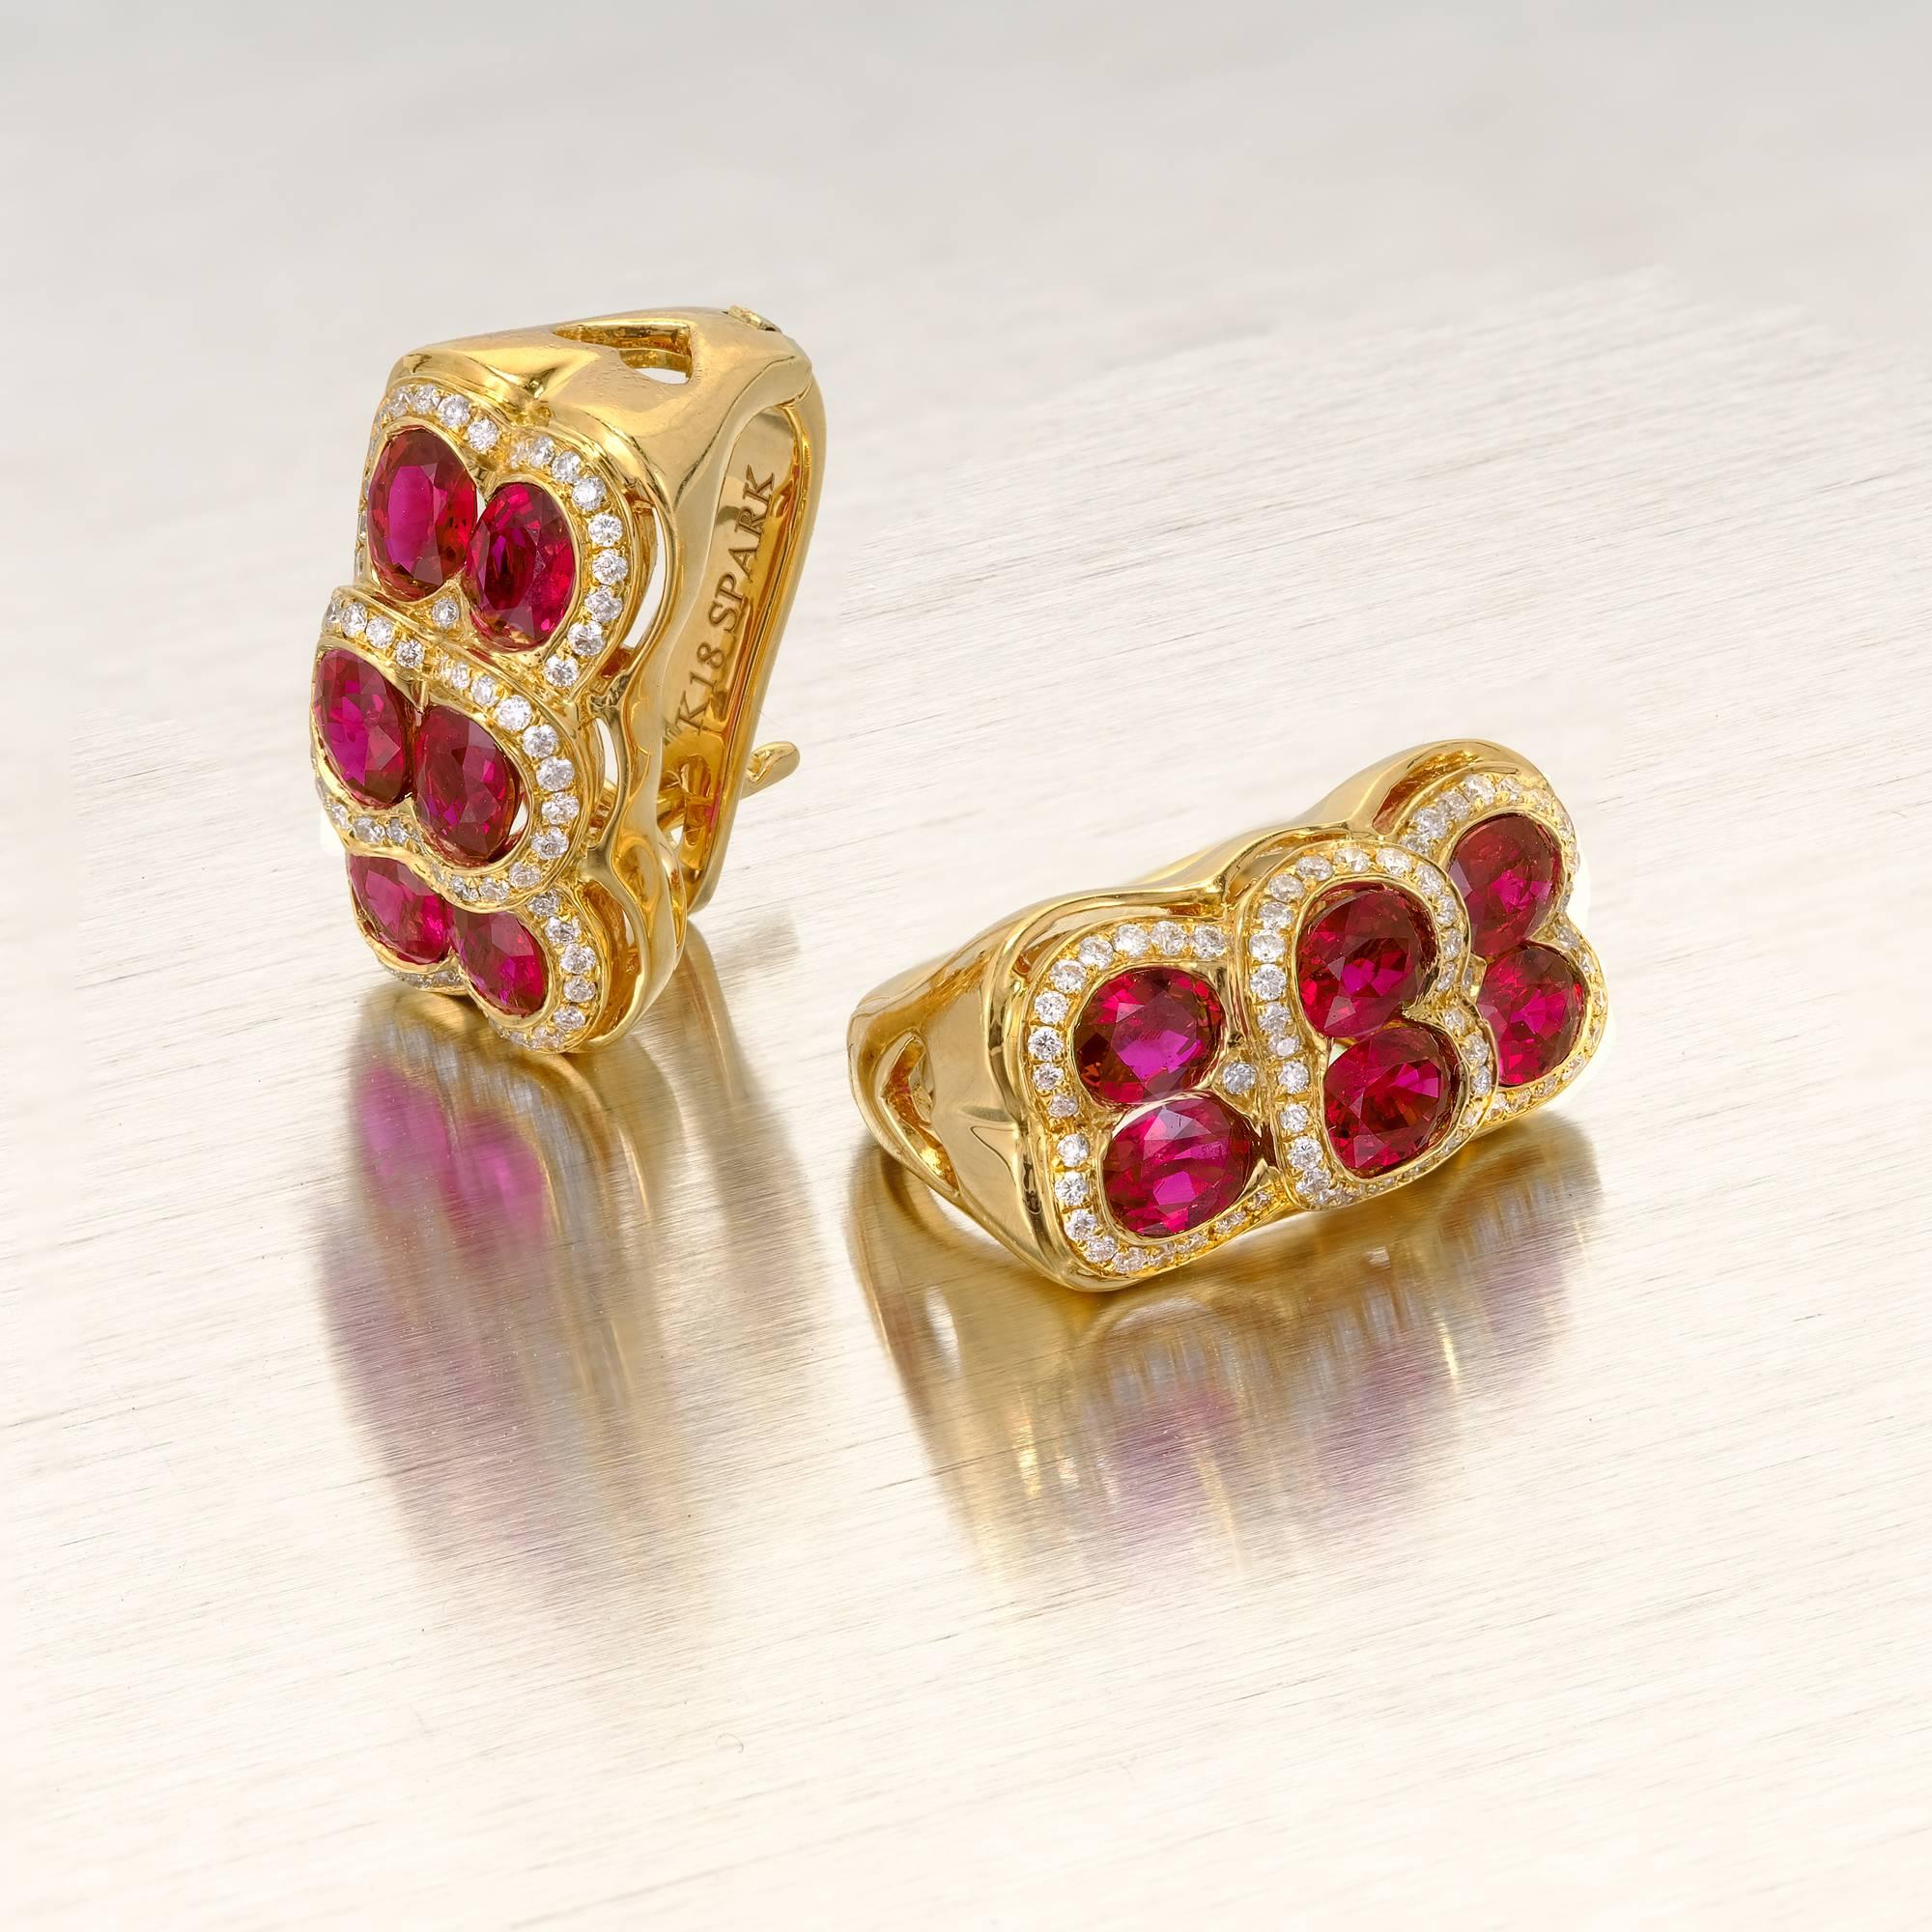 Ruby and diamond simple clip post earrings from Spark, in 18k yellow gold.  Circa 1980-1990.

12 gem bright red Rubies, approx. total weight .76cts, VS-SI
128 full cut diamonds, approx. total weight .33cts, F, VS
18k yellow gold
9.7 grams
Tested: